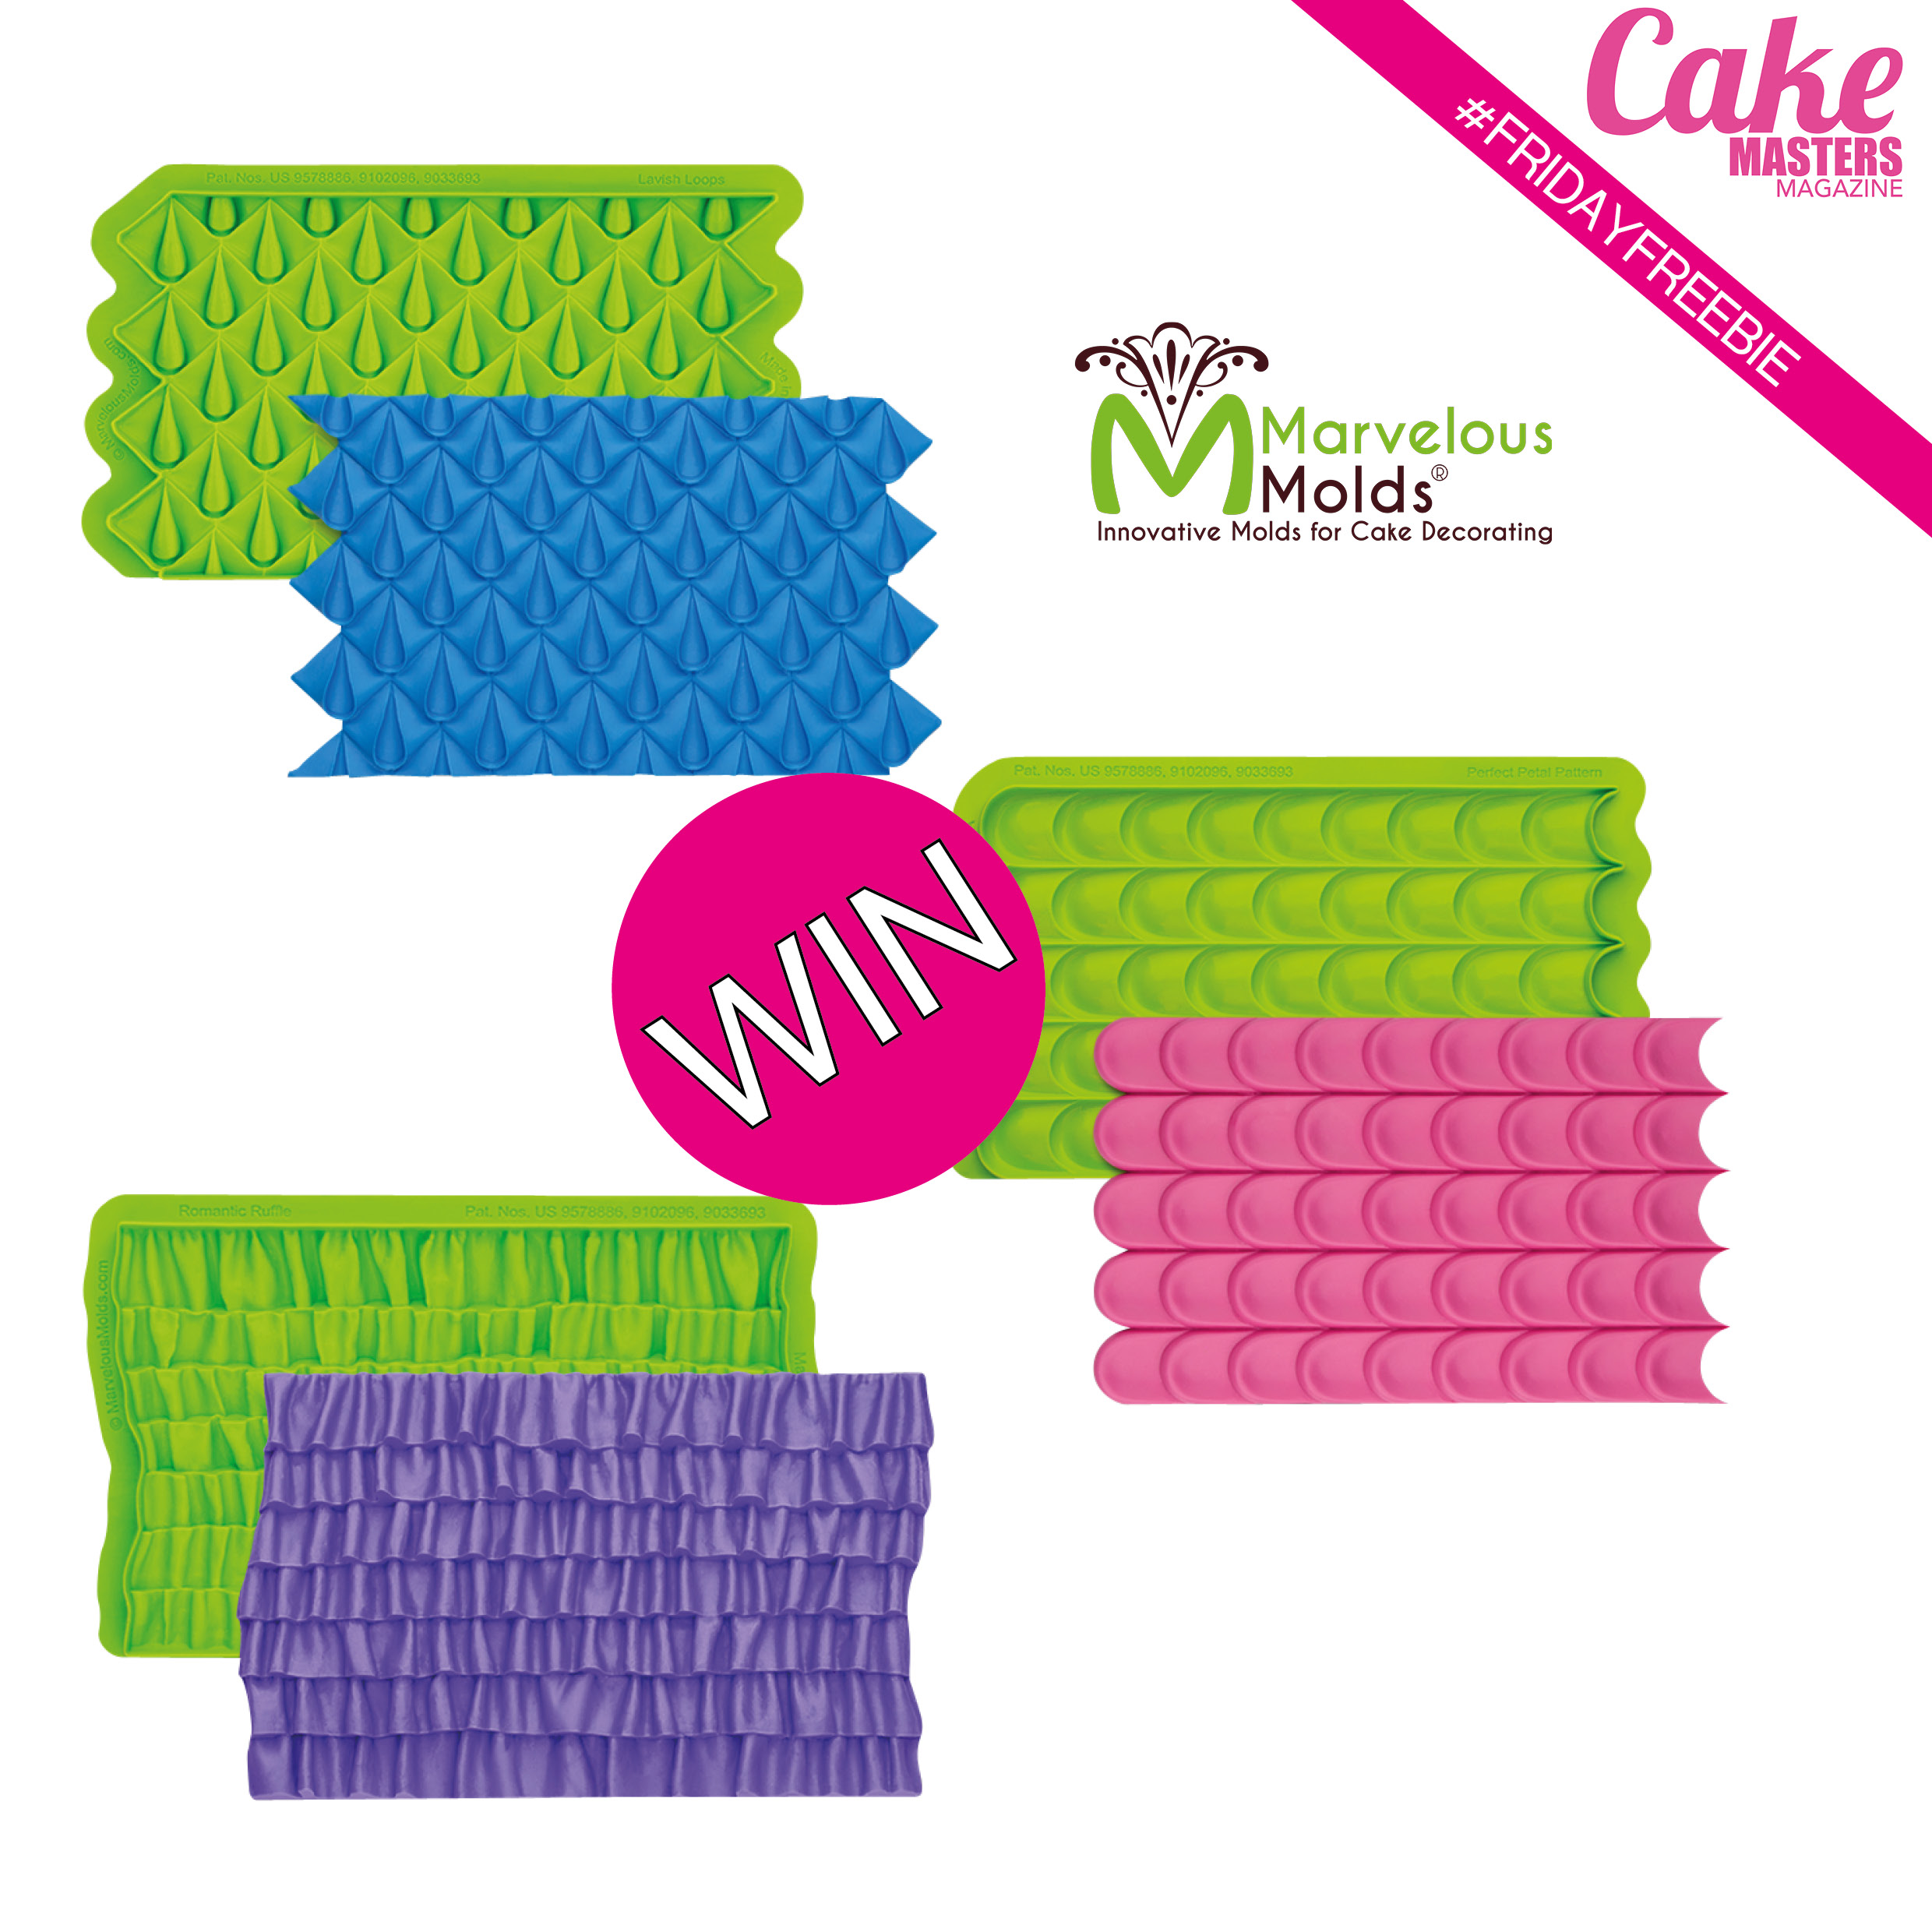 Win our Marvelous Molds Friday Freebie!